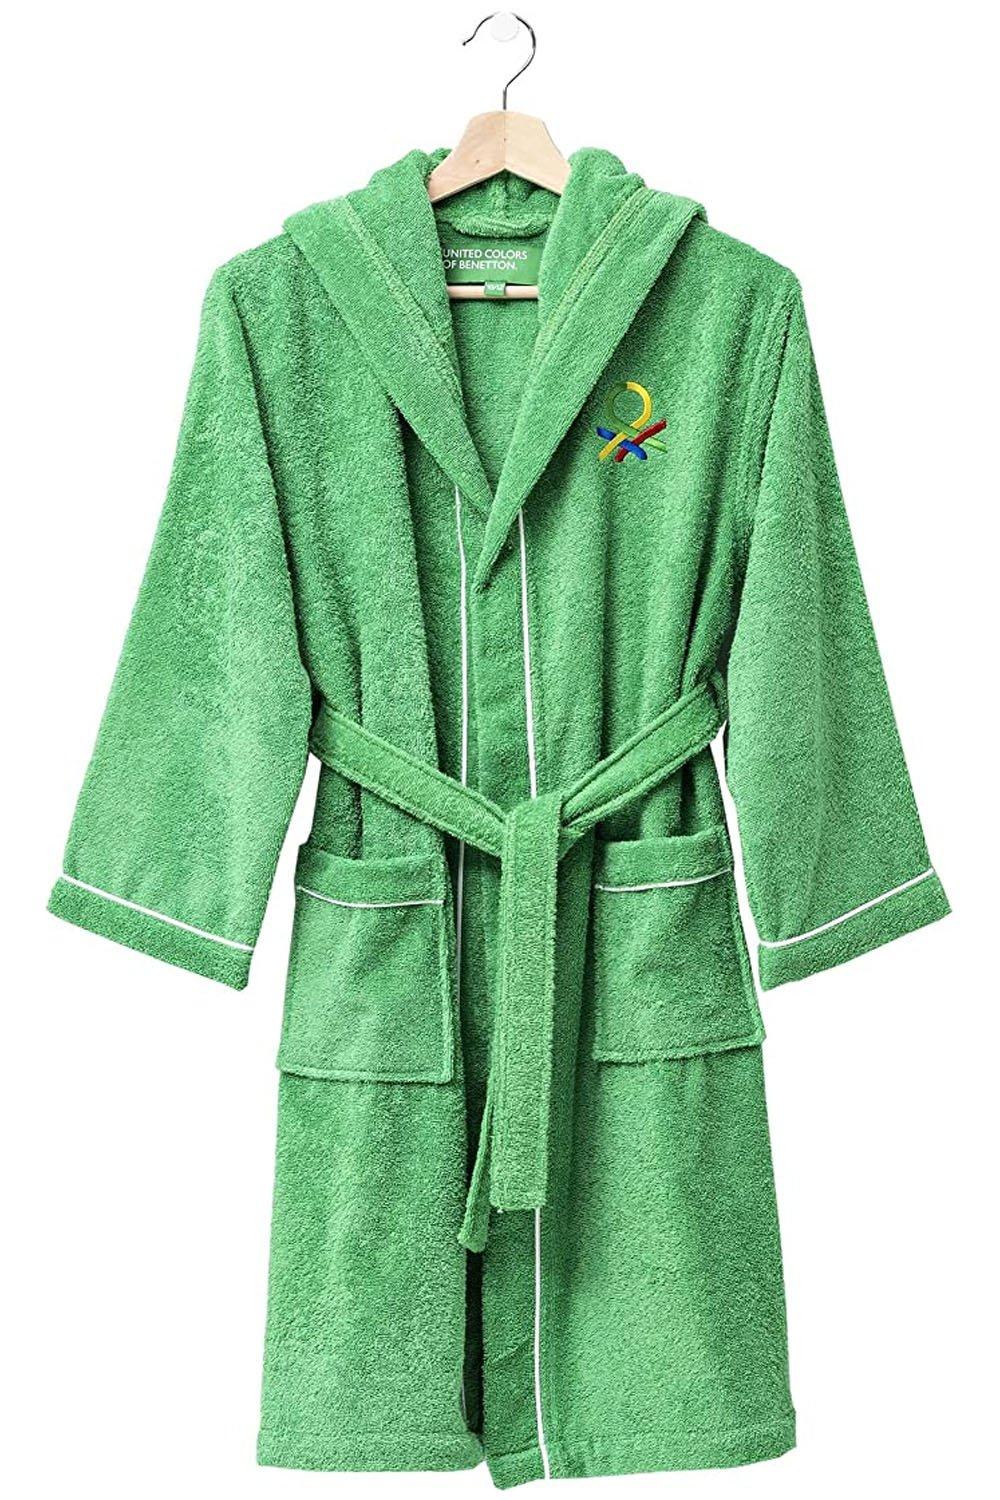 United Colors 100% Cotton Kids Bathrobe with Hoodie 10-12 Years Old Green